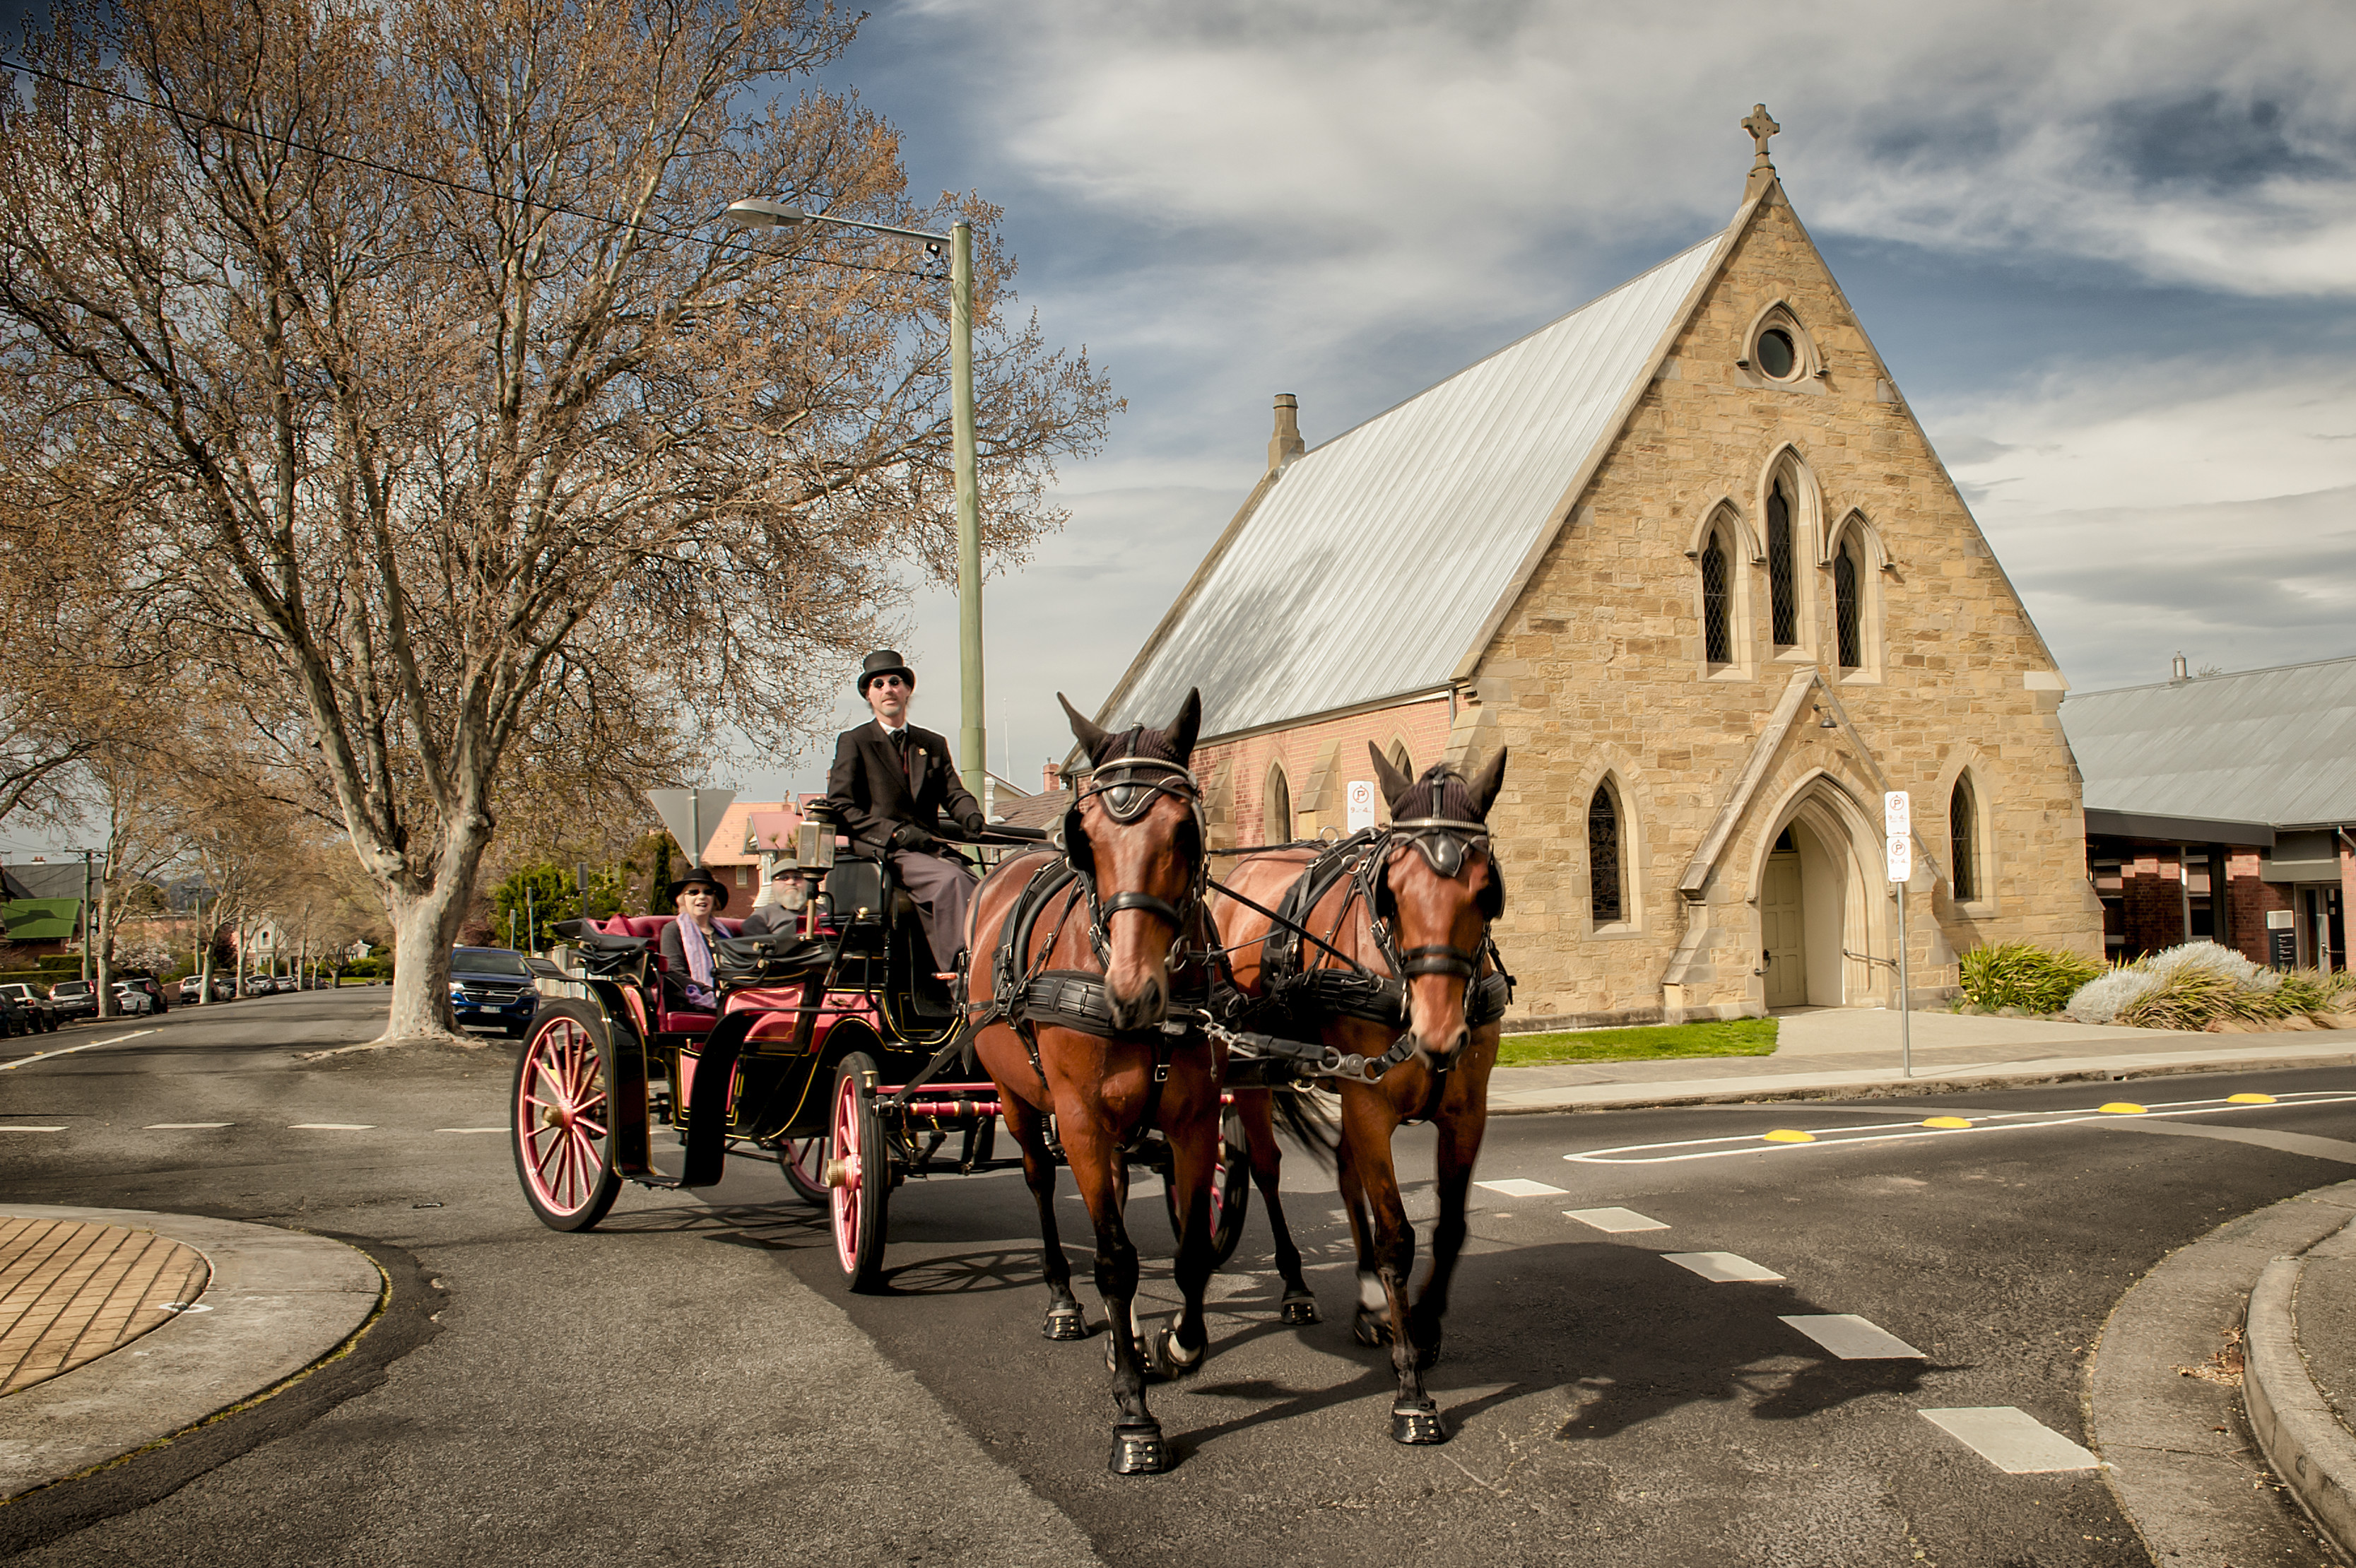 Two people experience Colonial Hobart by touring the Battery Point area and Salamanca Place, riding in an open carriage driven by a pair of horses.